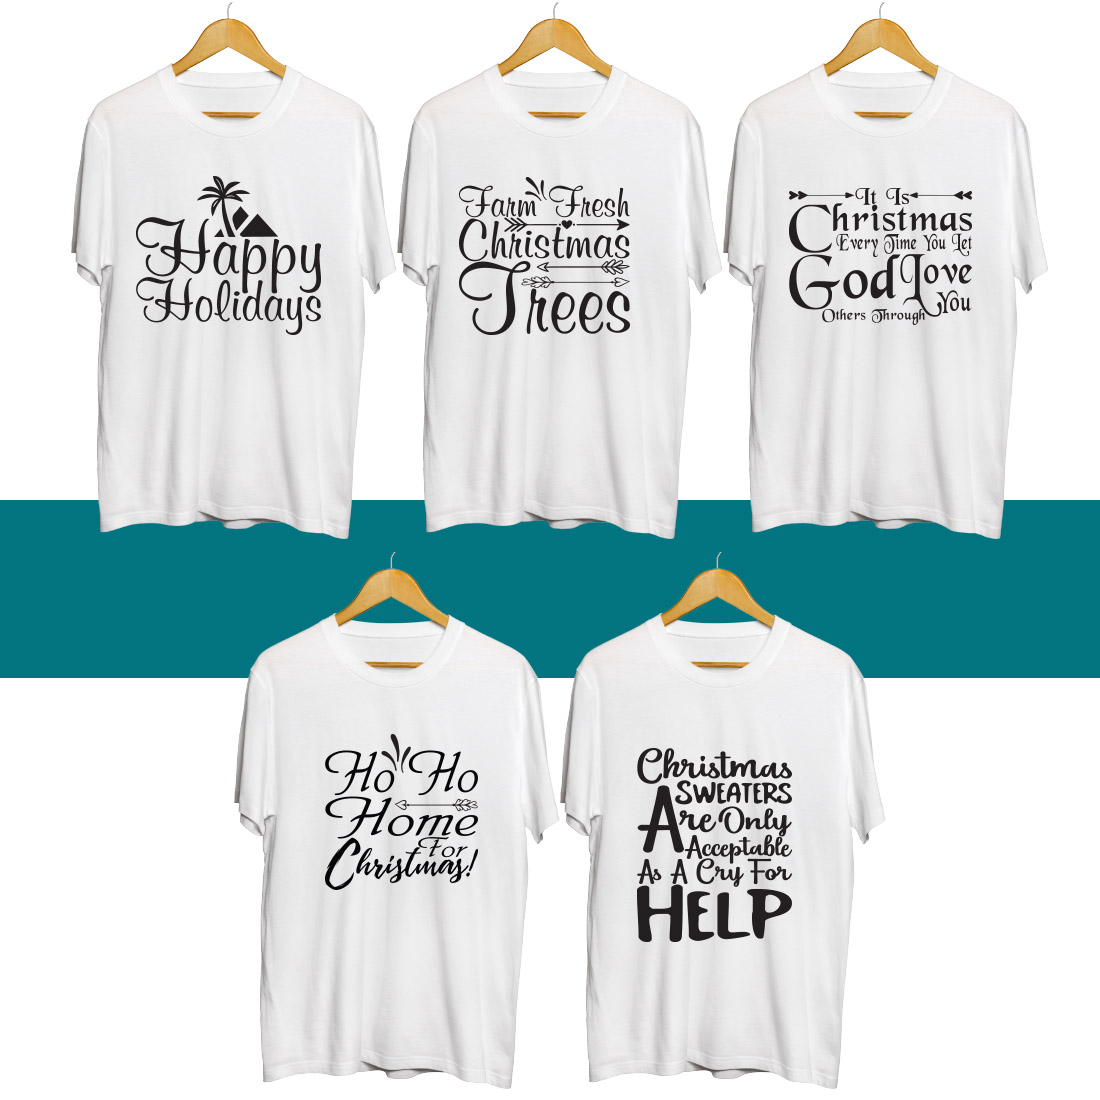 Four t - shirts with christmas sayings on them.